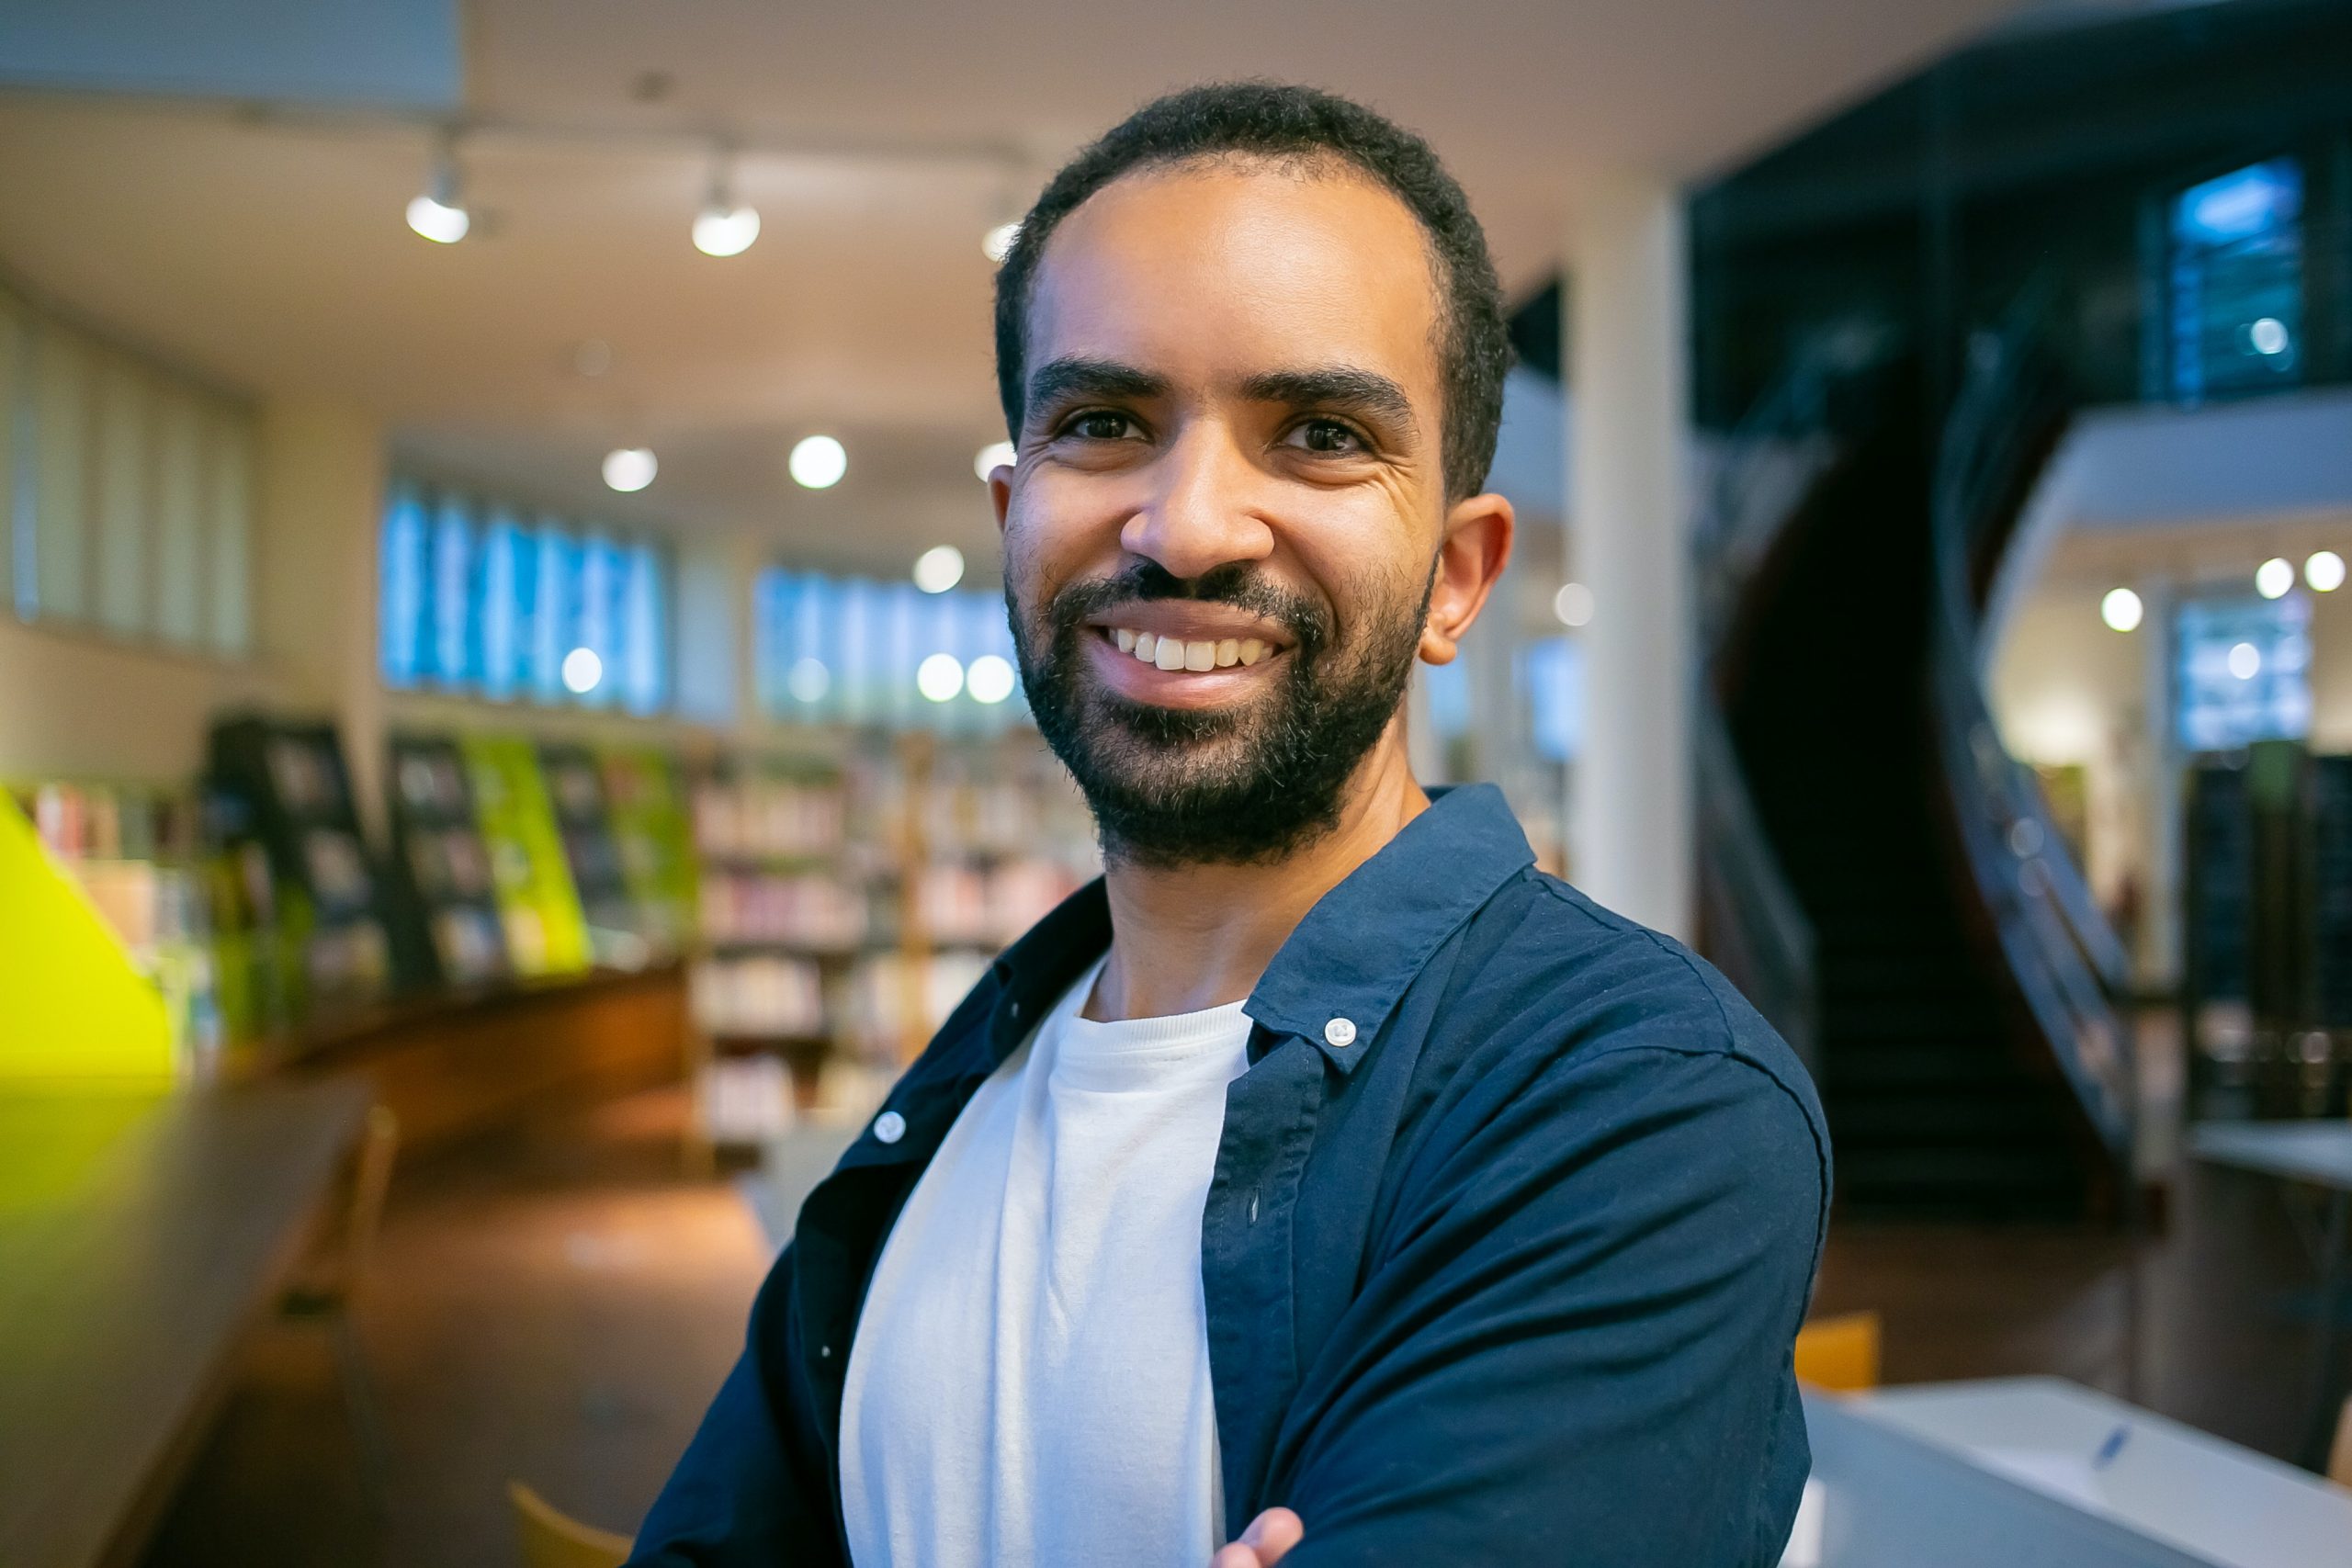 Man smiling in library